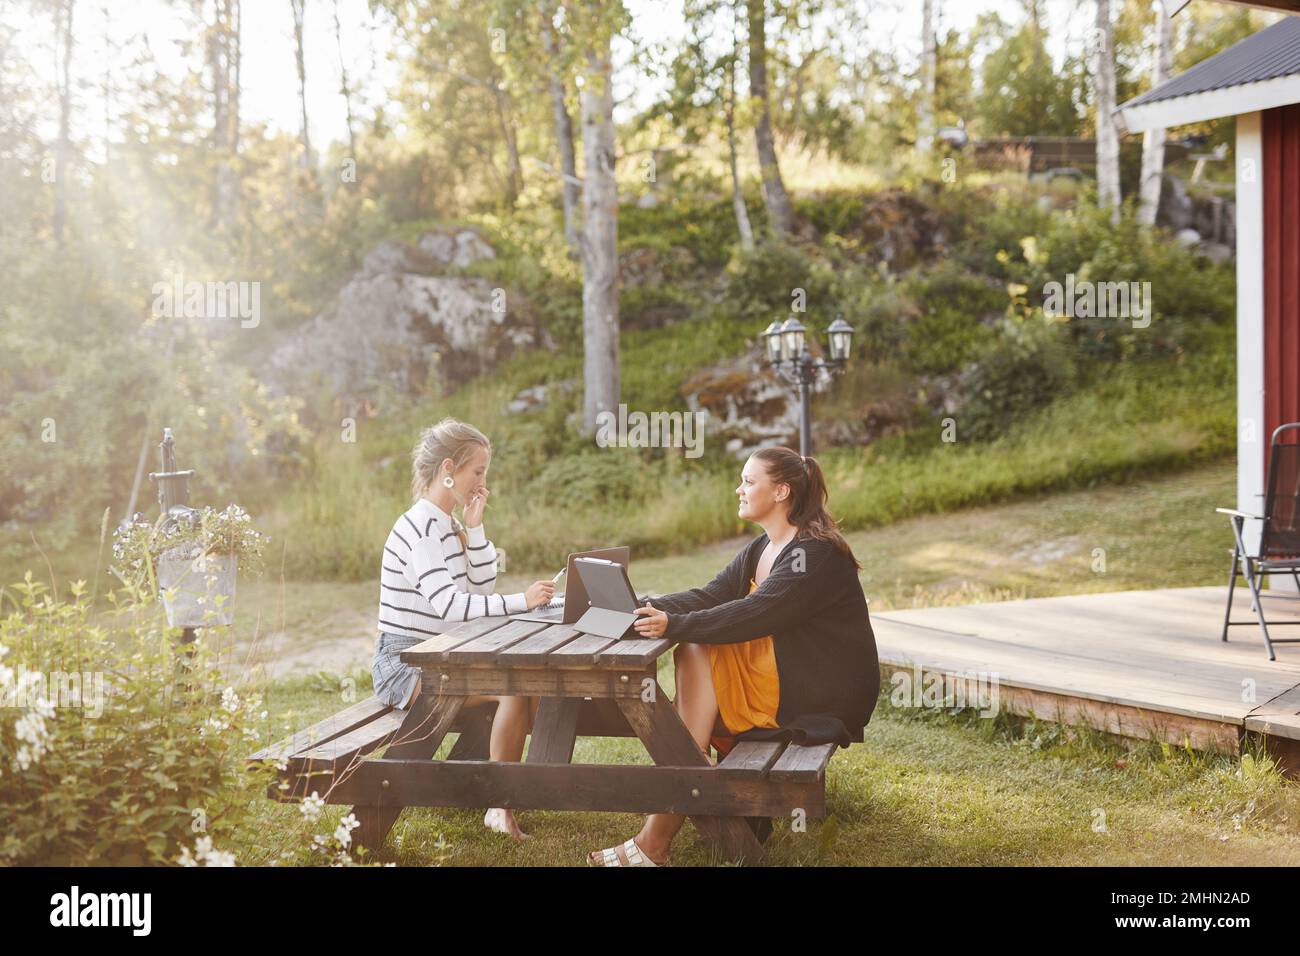 Female friends sitting on picnic bench Stock Photo